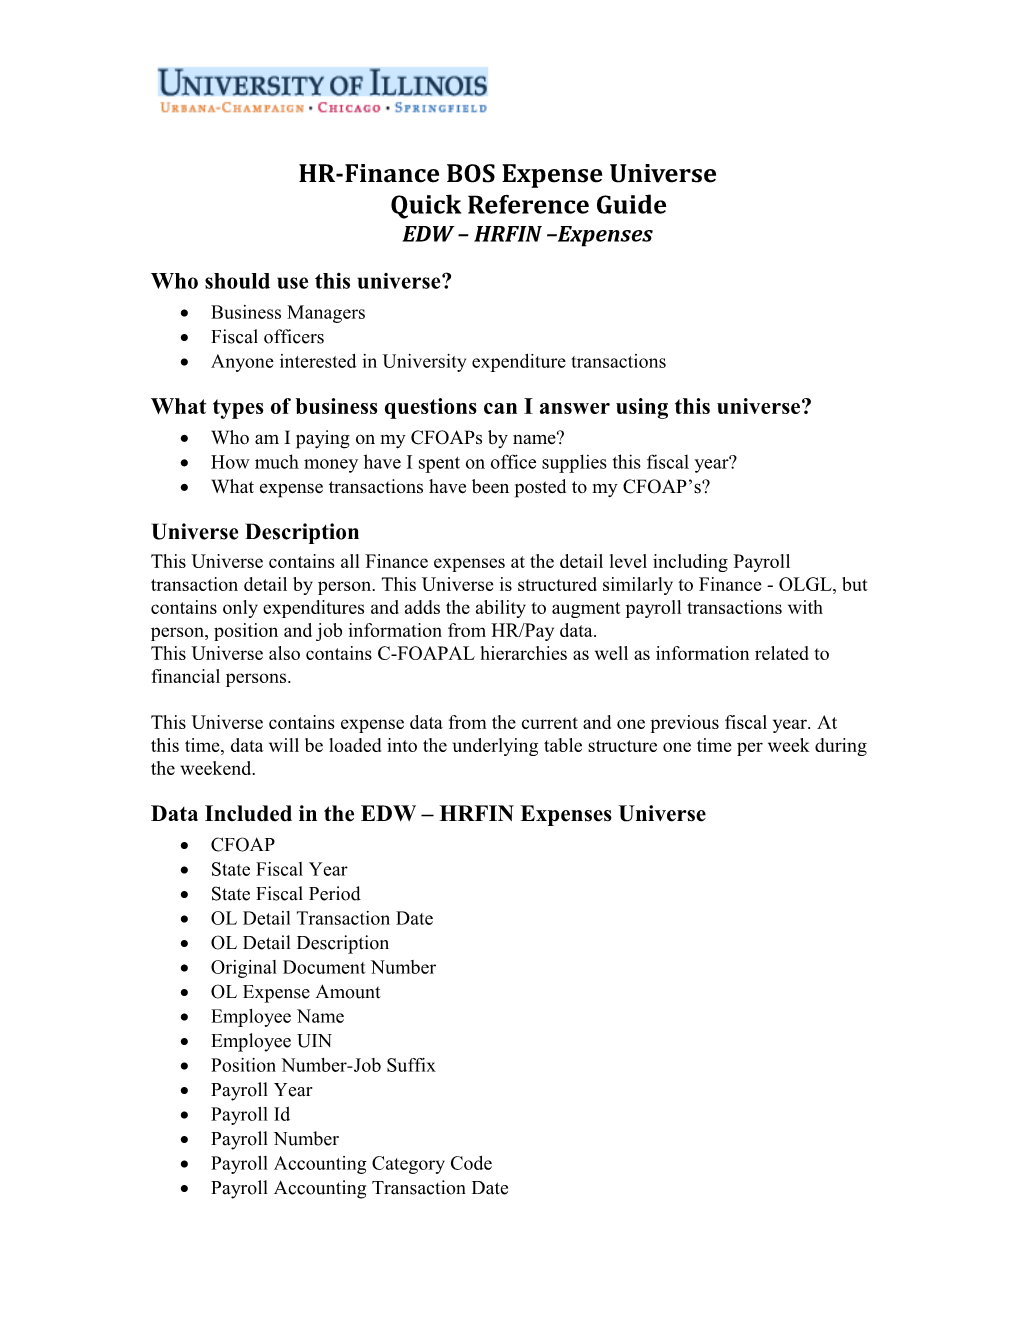 HR-Finance BOS Expense Universequick Reference Guideedw HRFIN Expenses